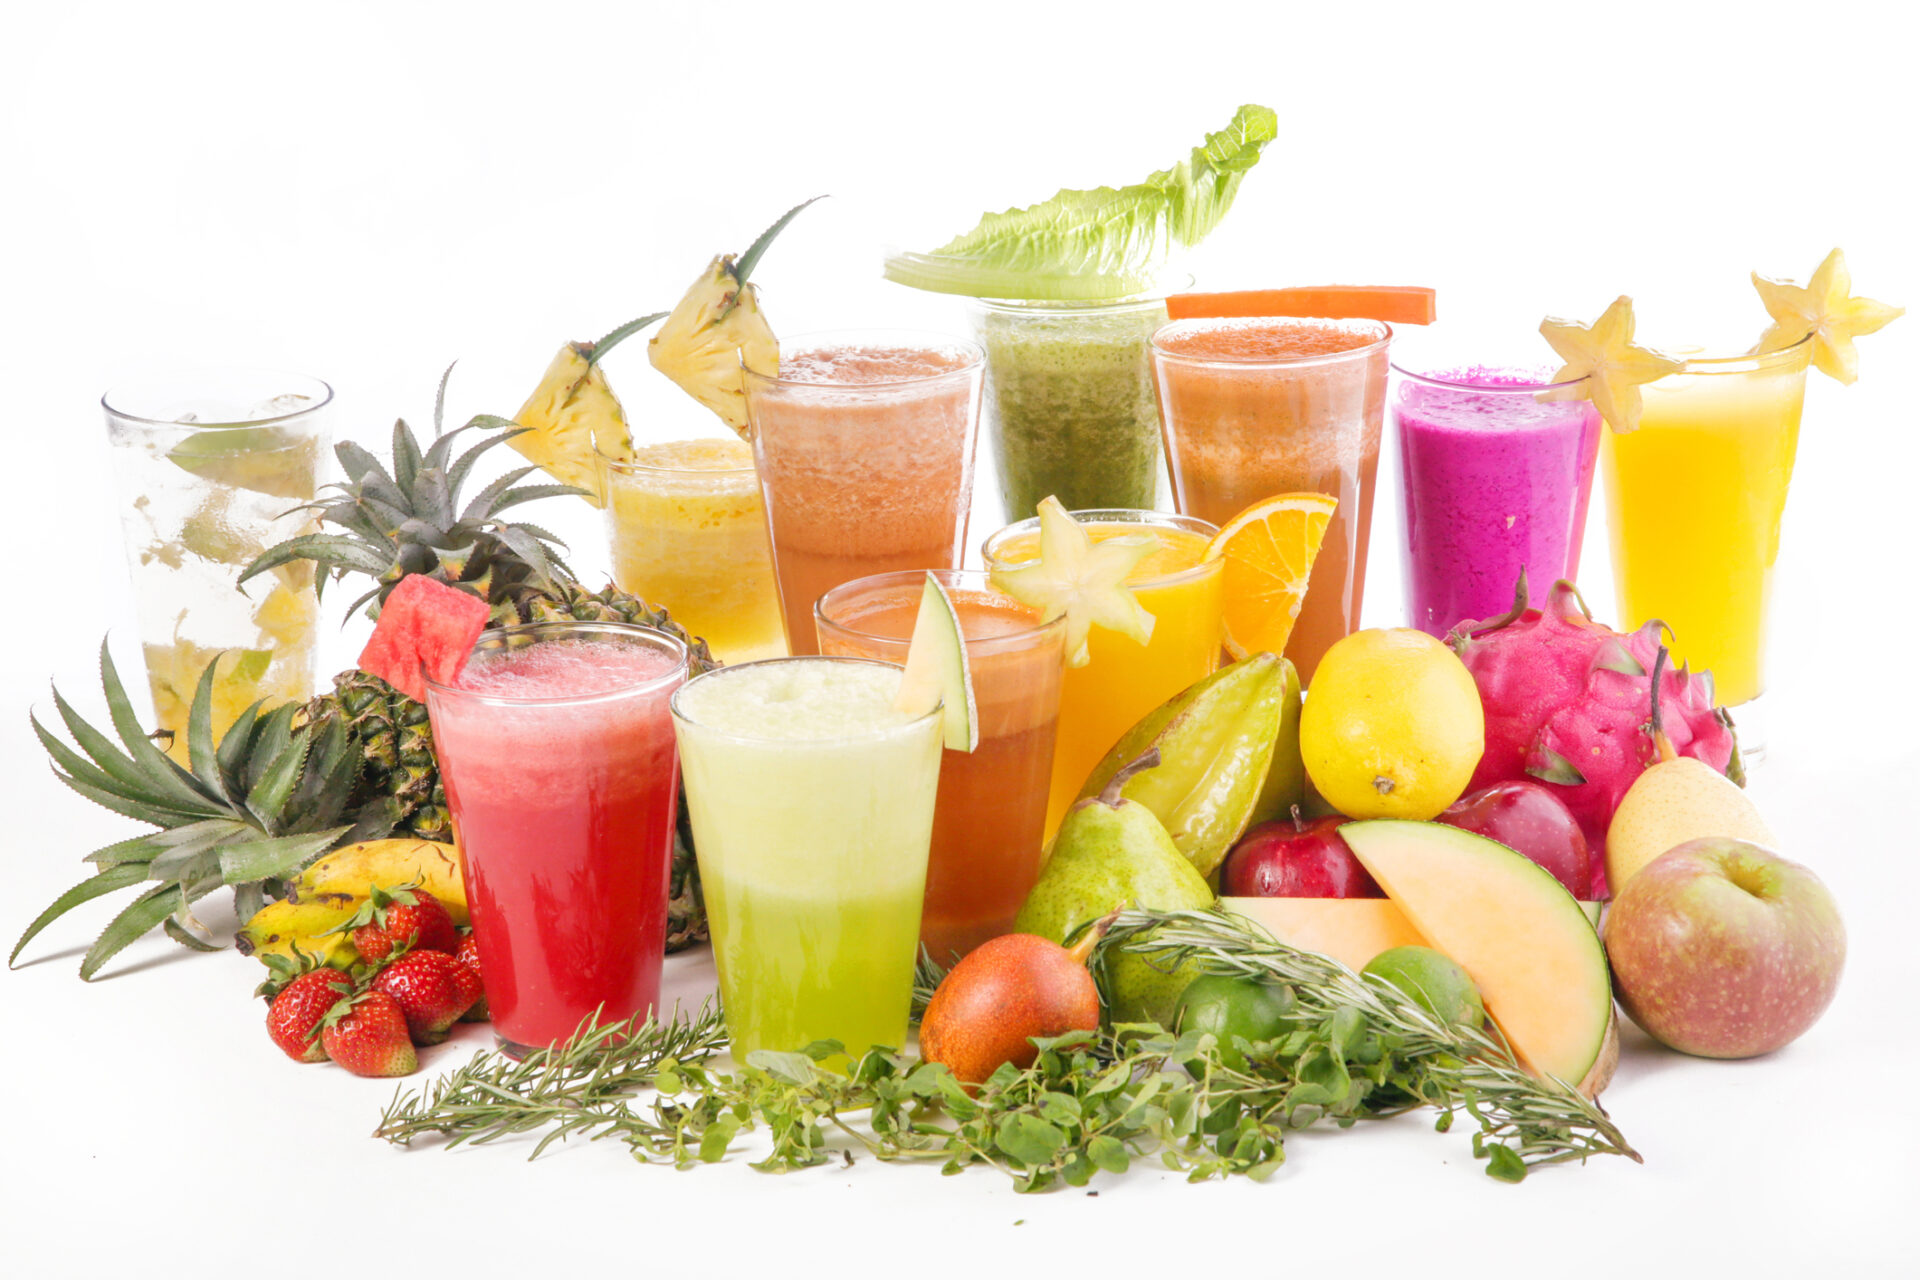 The Cold Pressed Juice Market: Fueling the Healthy Beverage Industry